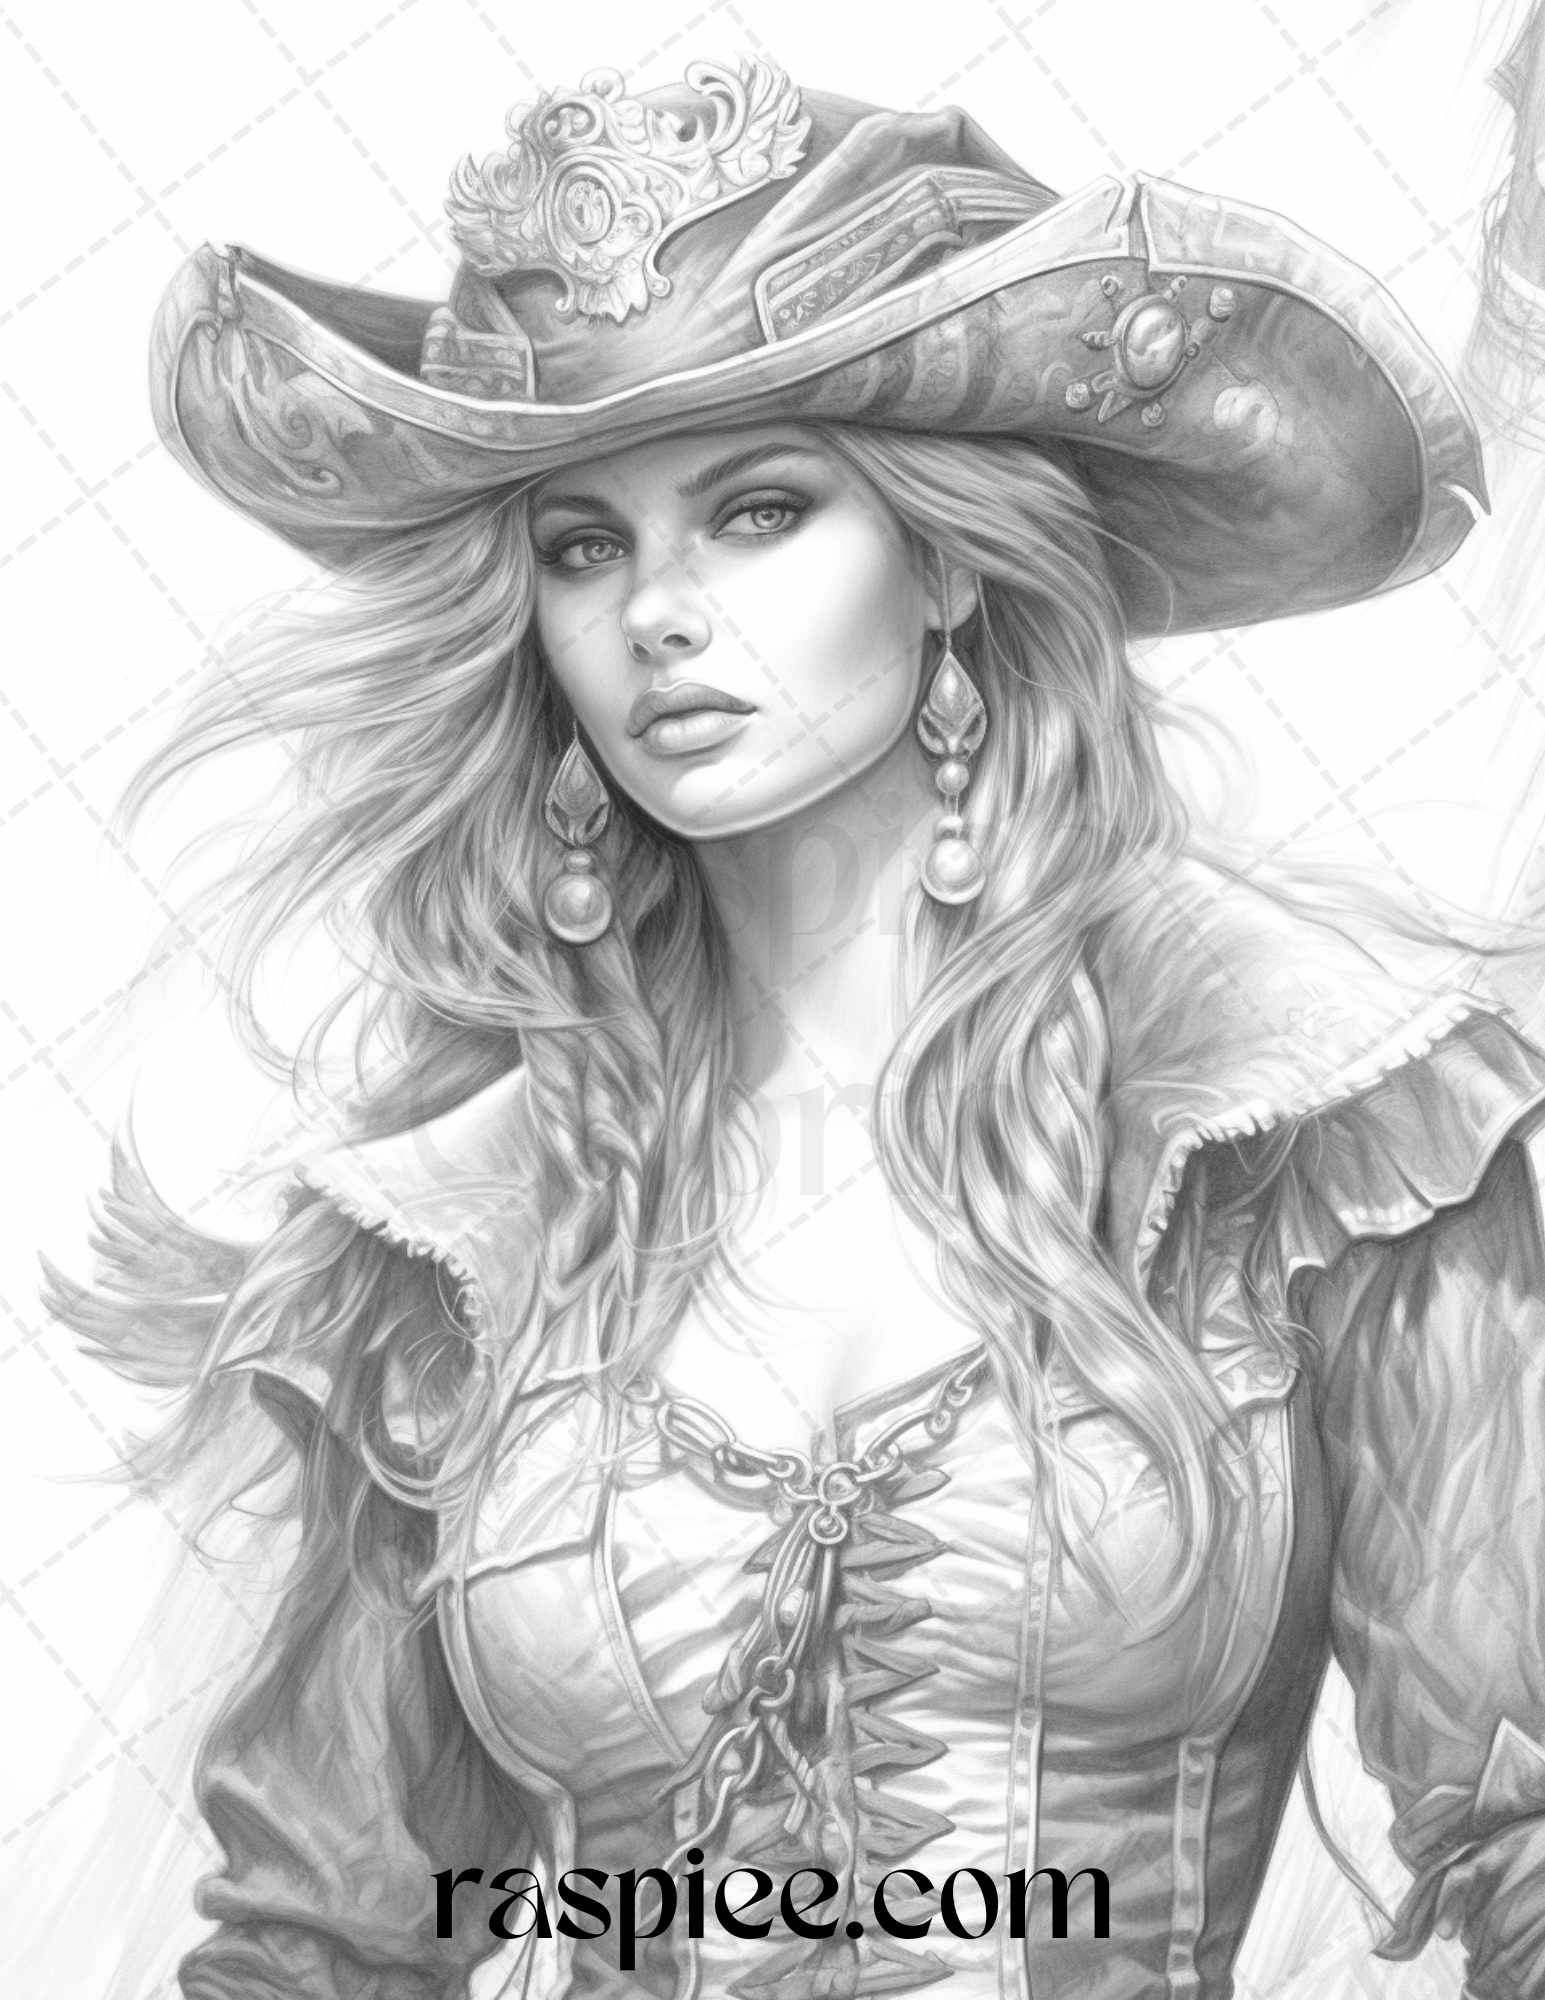 Pirate life grayscale coloring pages printable for adults stress r â coloring